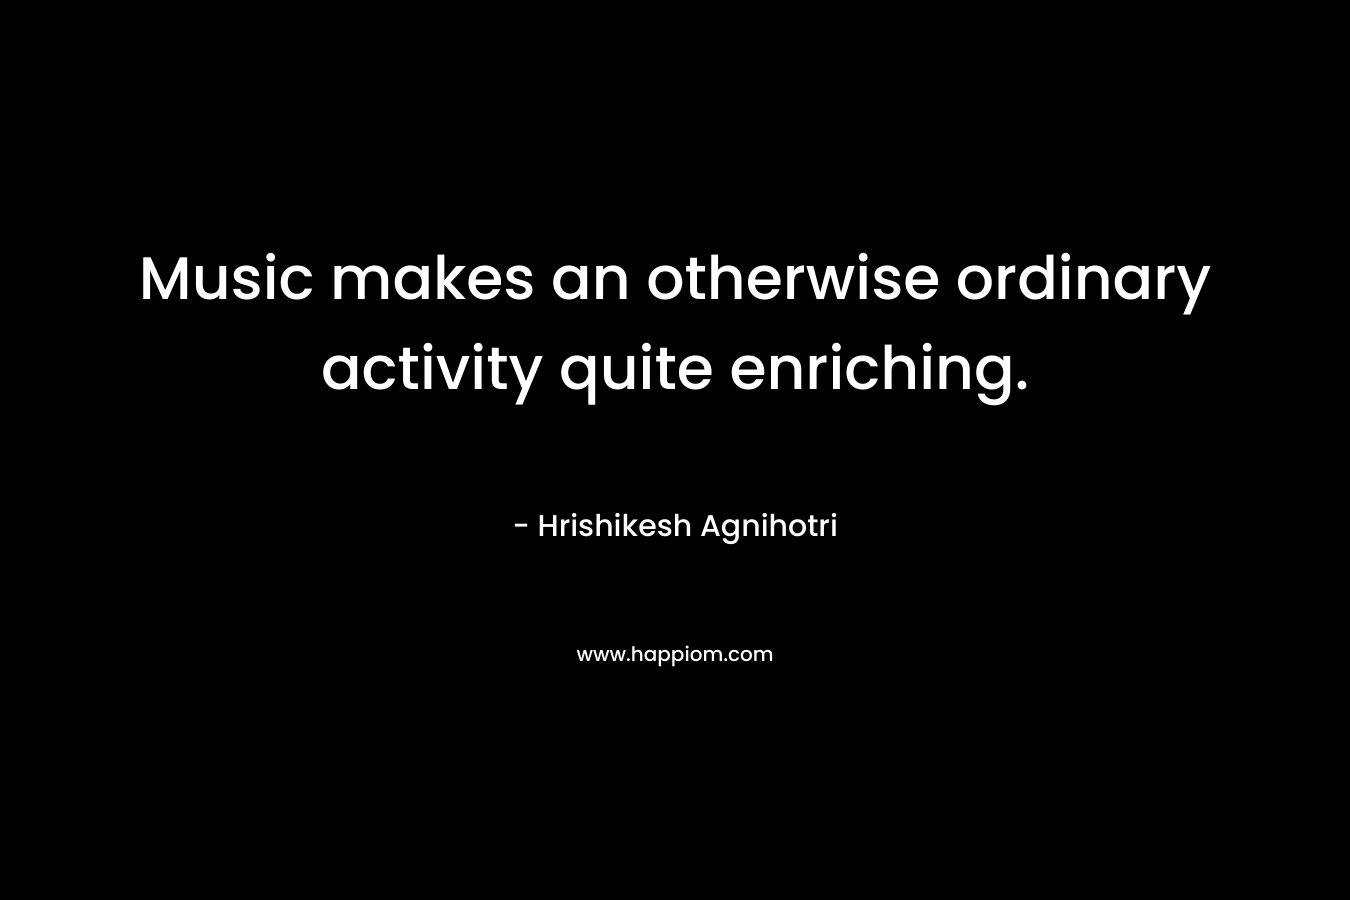 Music makes an otherwise ordinary activity quite enriching. – Hrishikesh Agnihotri